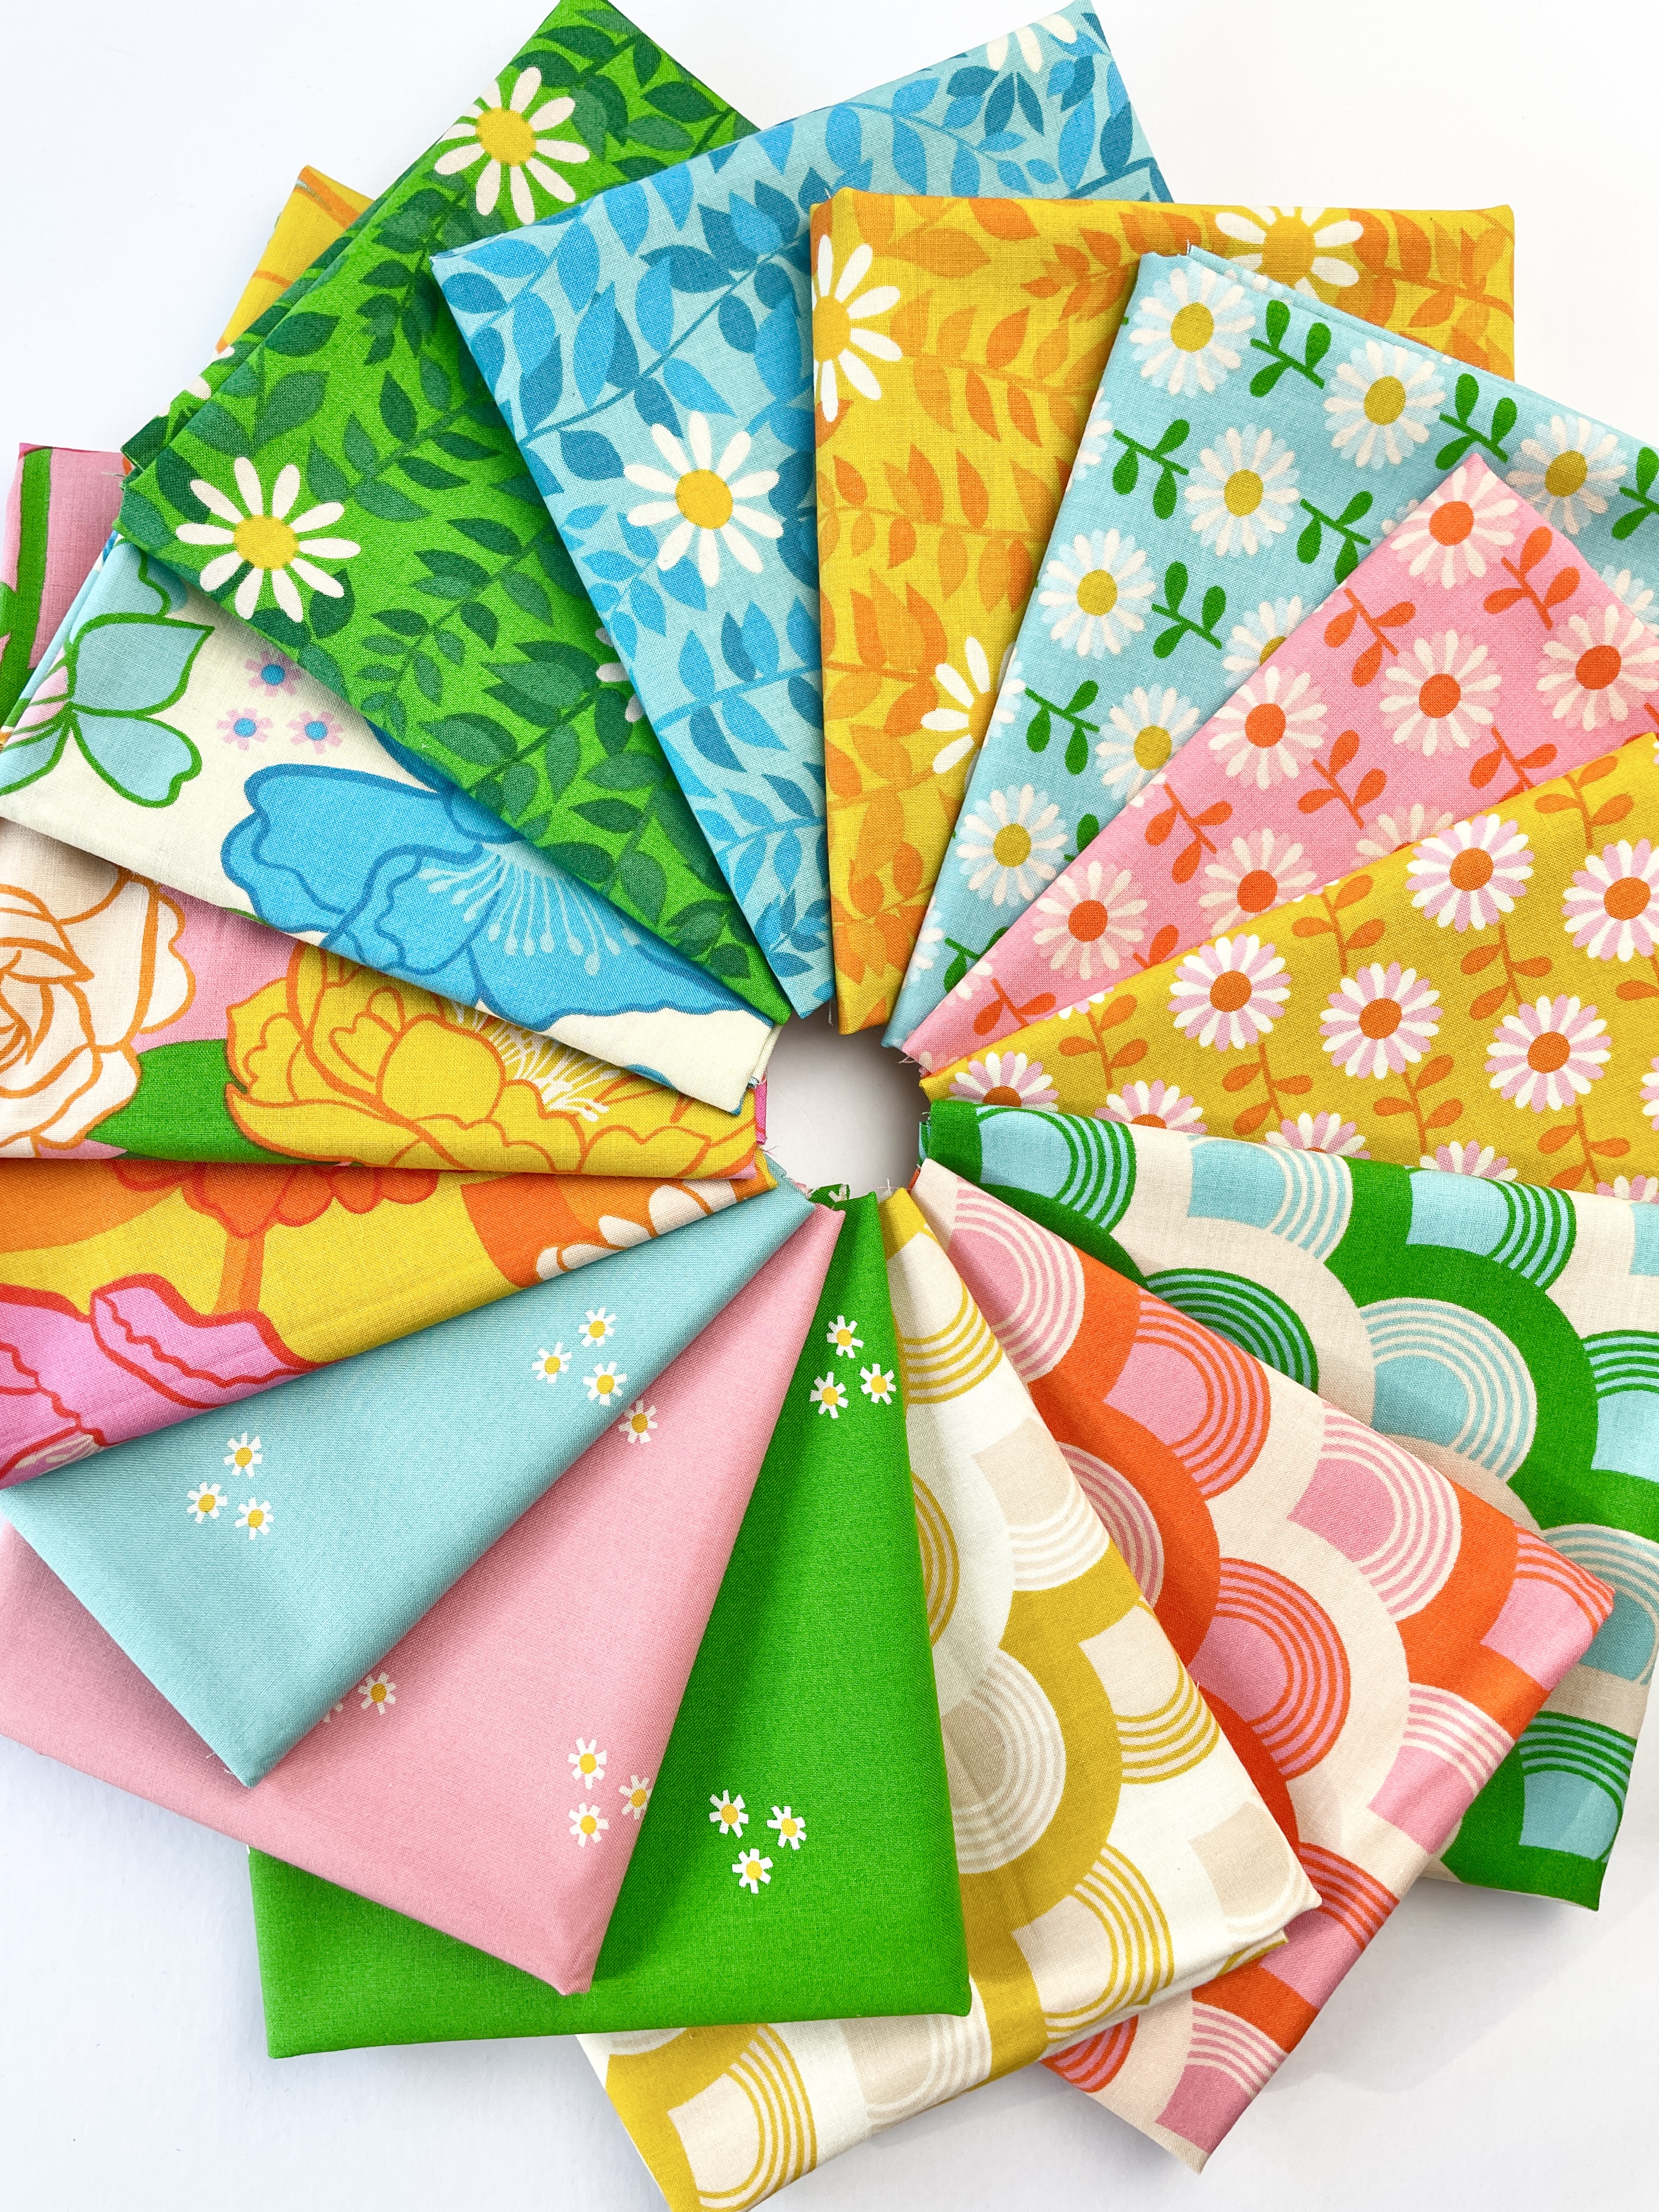 Modern patchwork and quilting fabric fat quarter bundles at The Fabric Fox